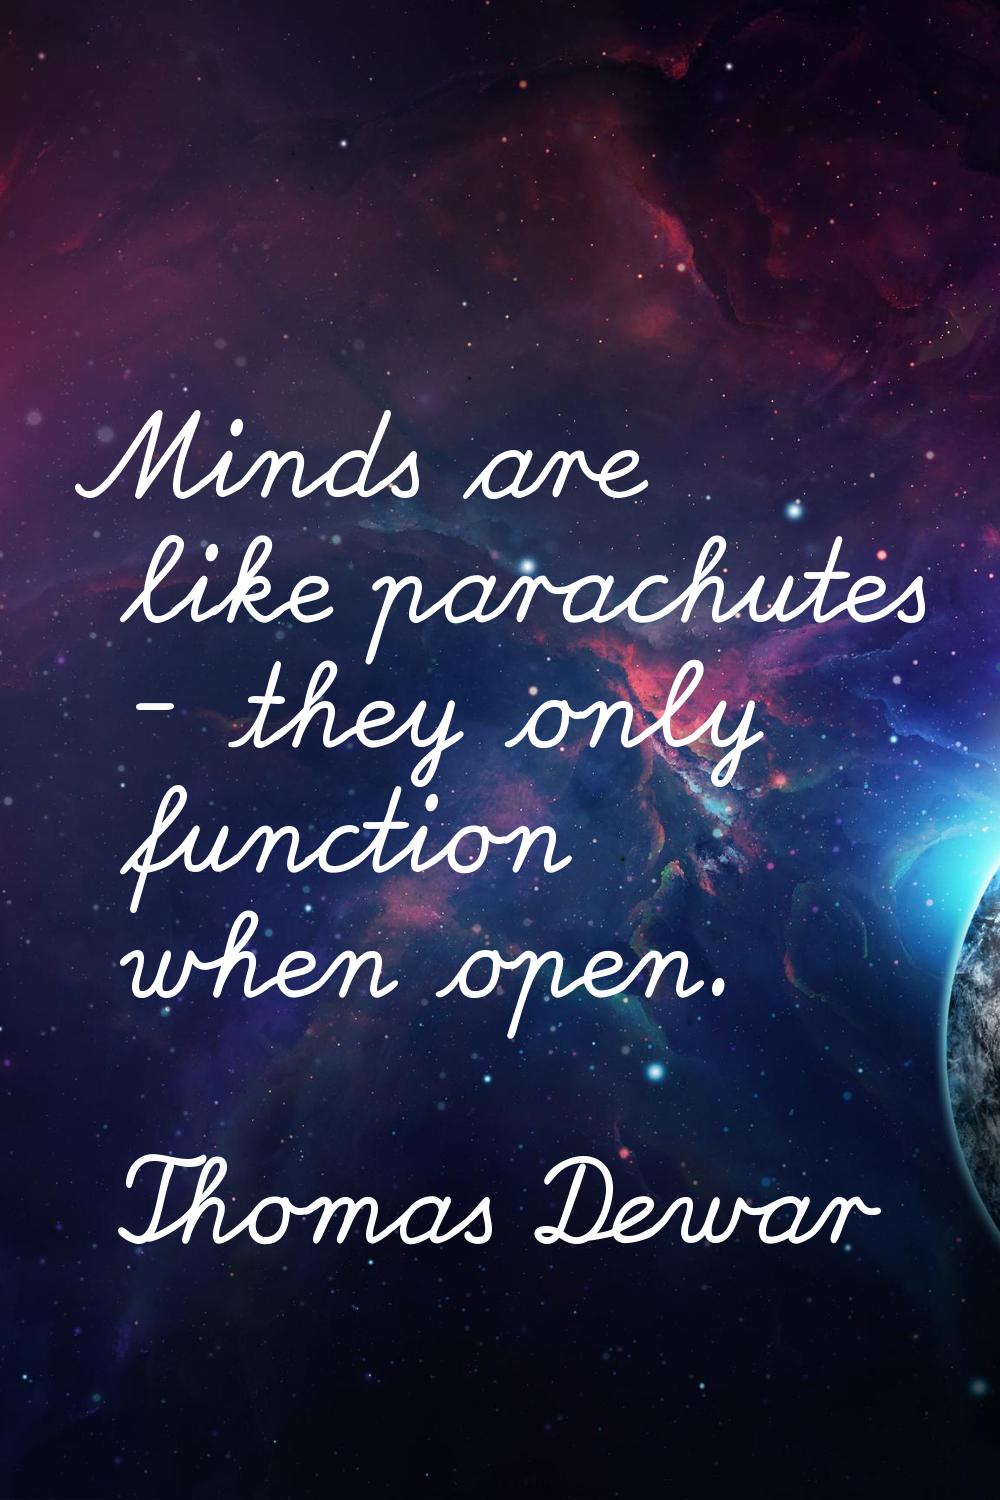 Minds are like parachutes - they only function when open.